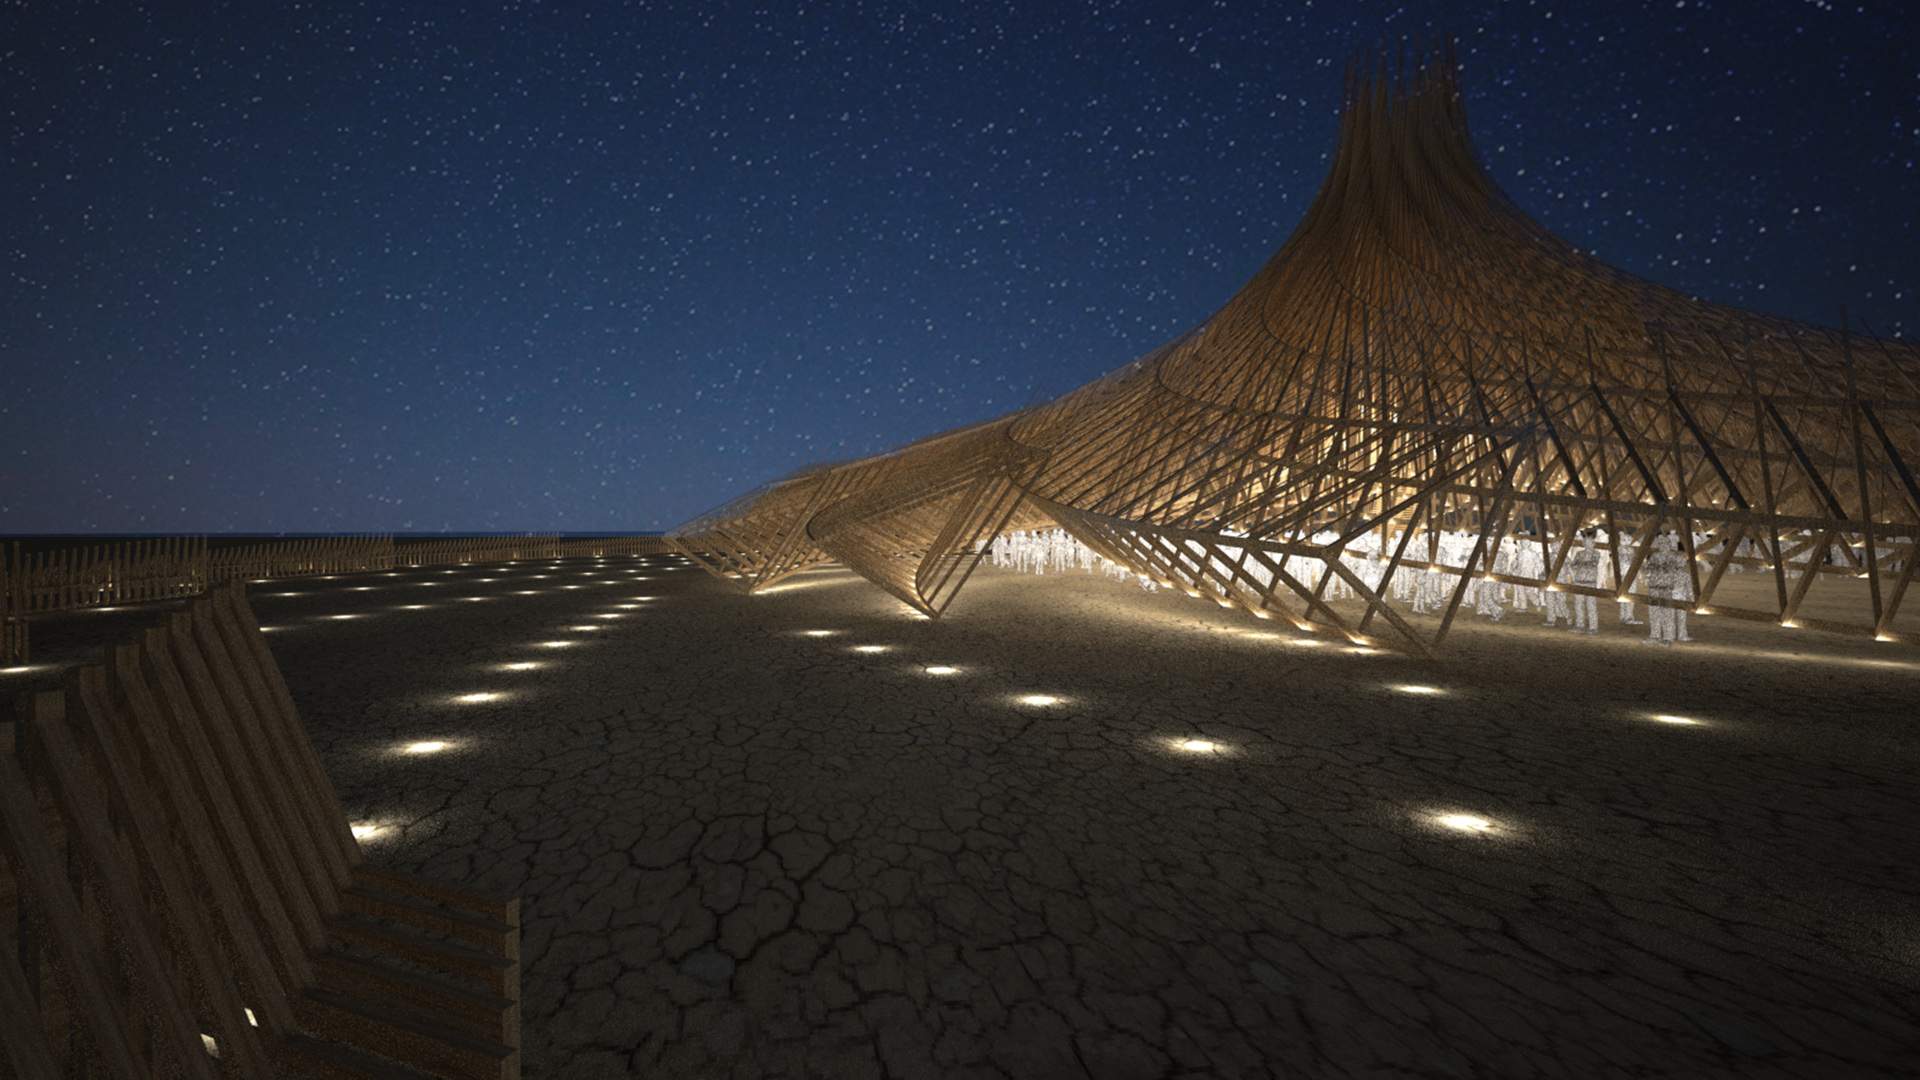 This Swirling Design Has Been Chosen as Burning Man's 2018 Temple